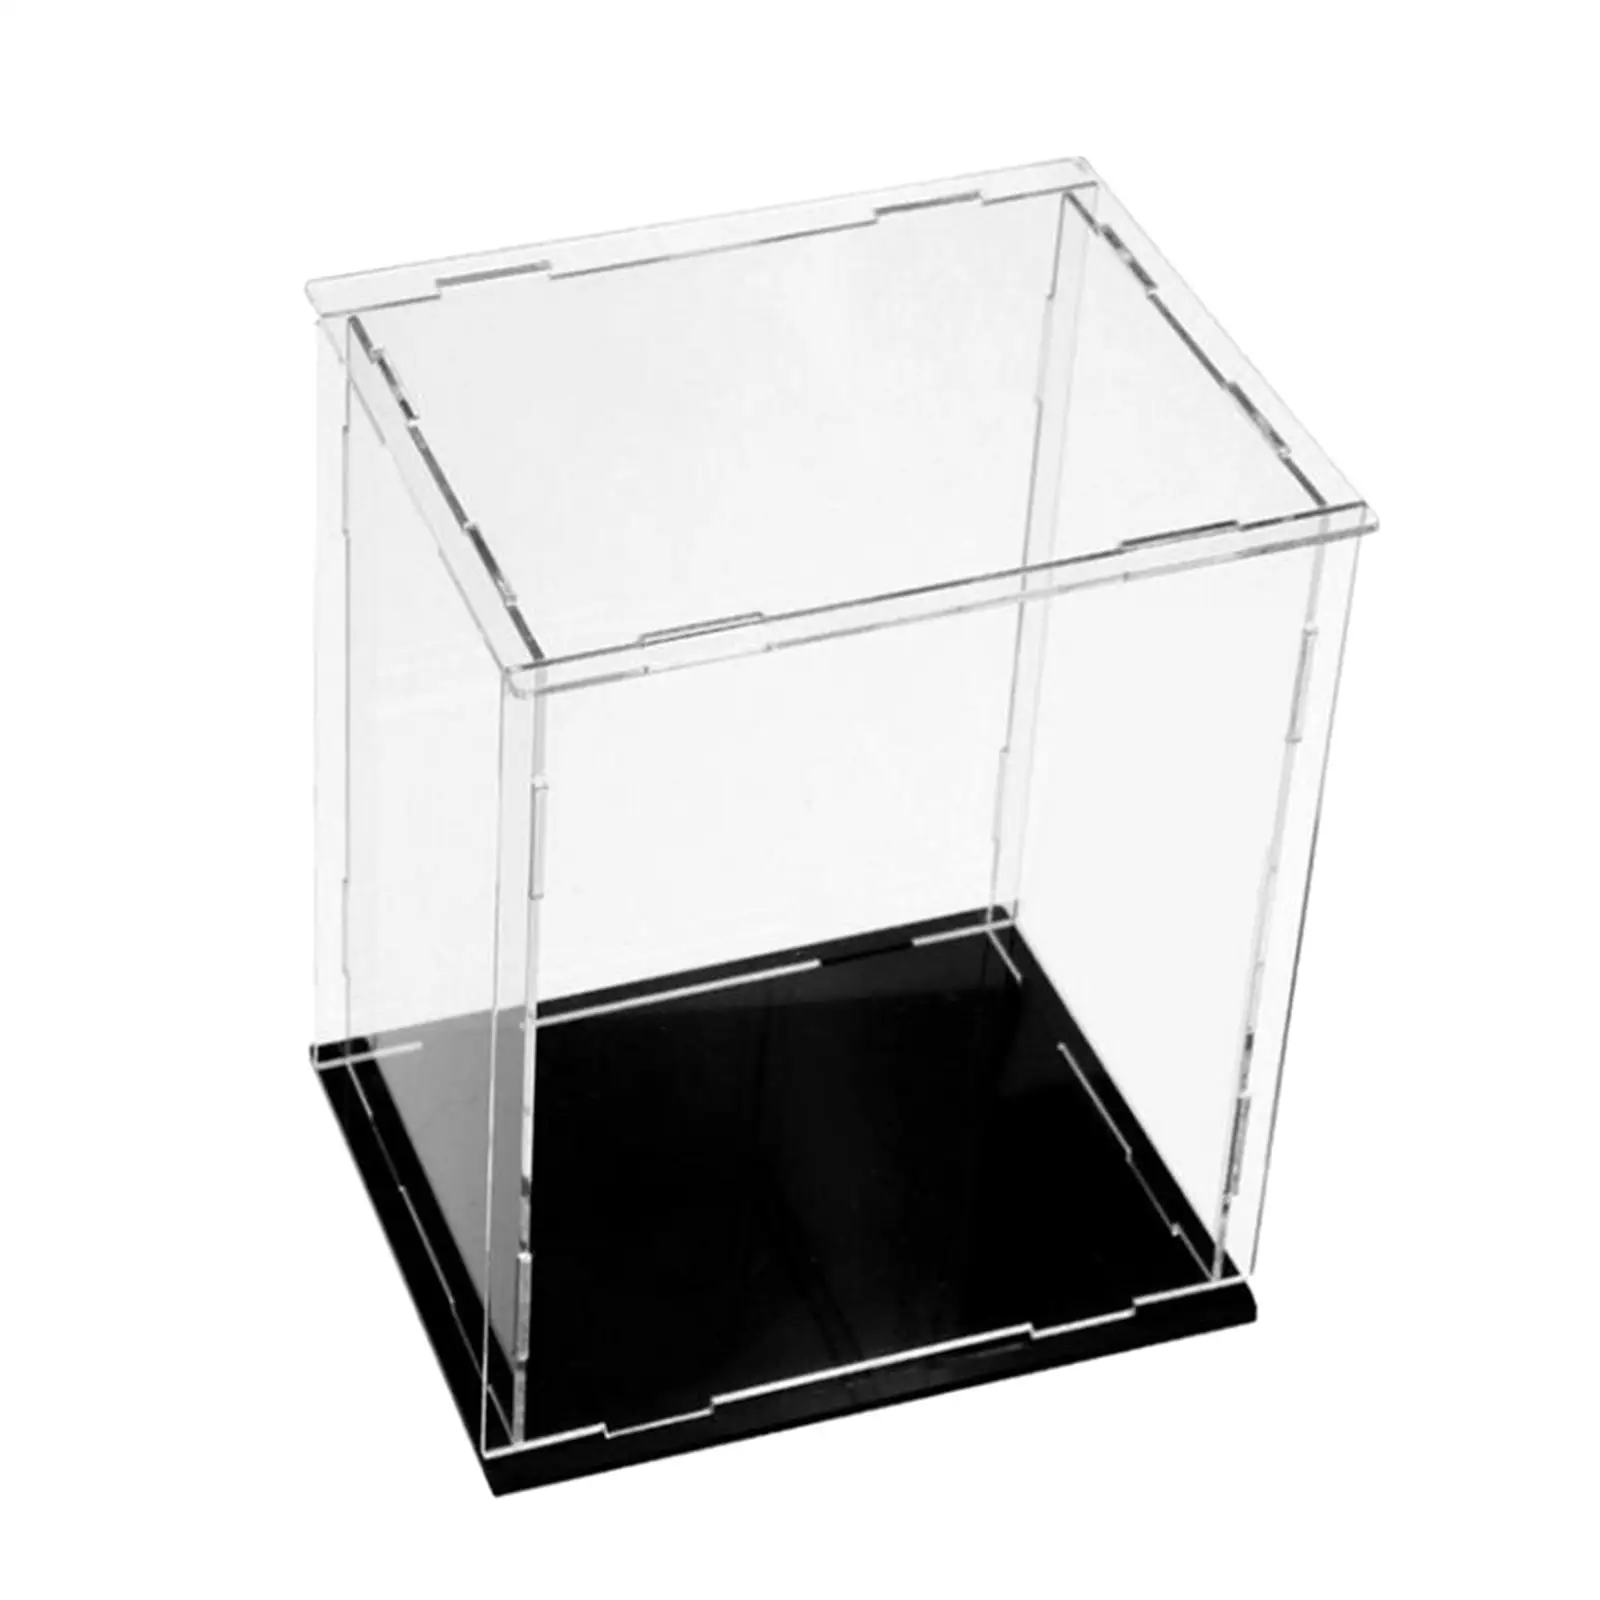 Acrylic Display Case Action Figures Display Box for Action Figure Toys Dolls